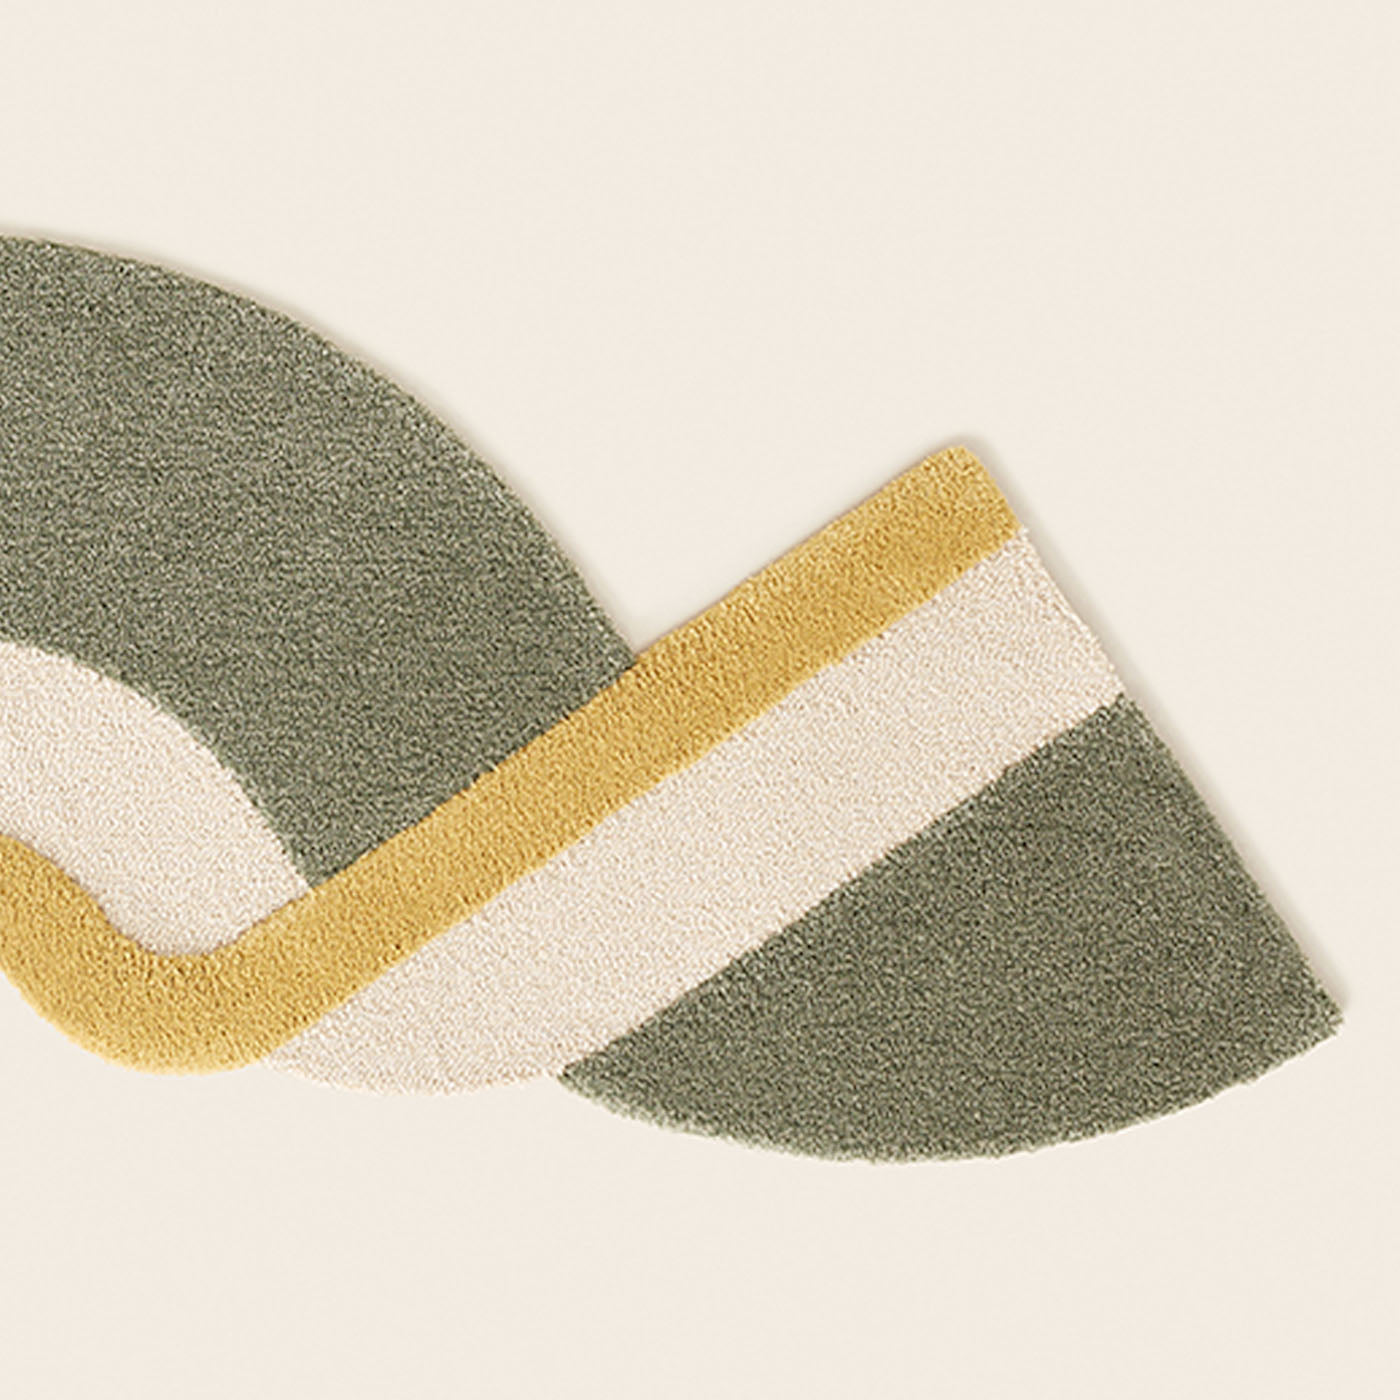 Nesso Due Runner Olive & Gold Rug - Alternative view 2